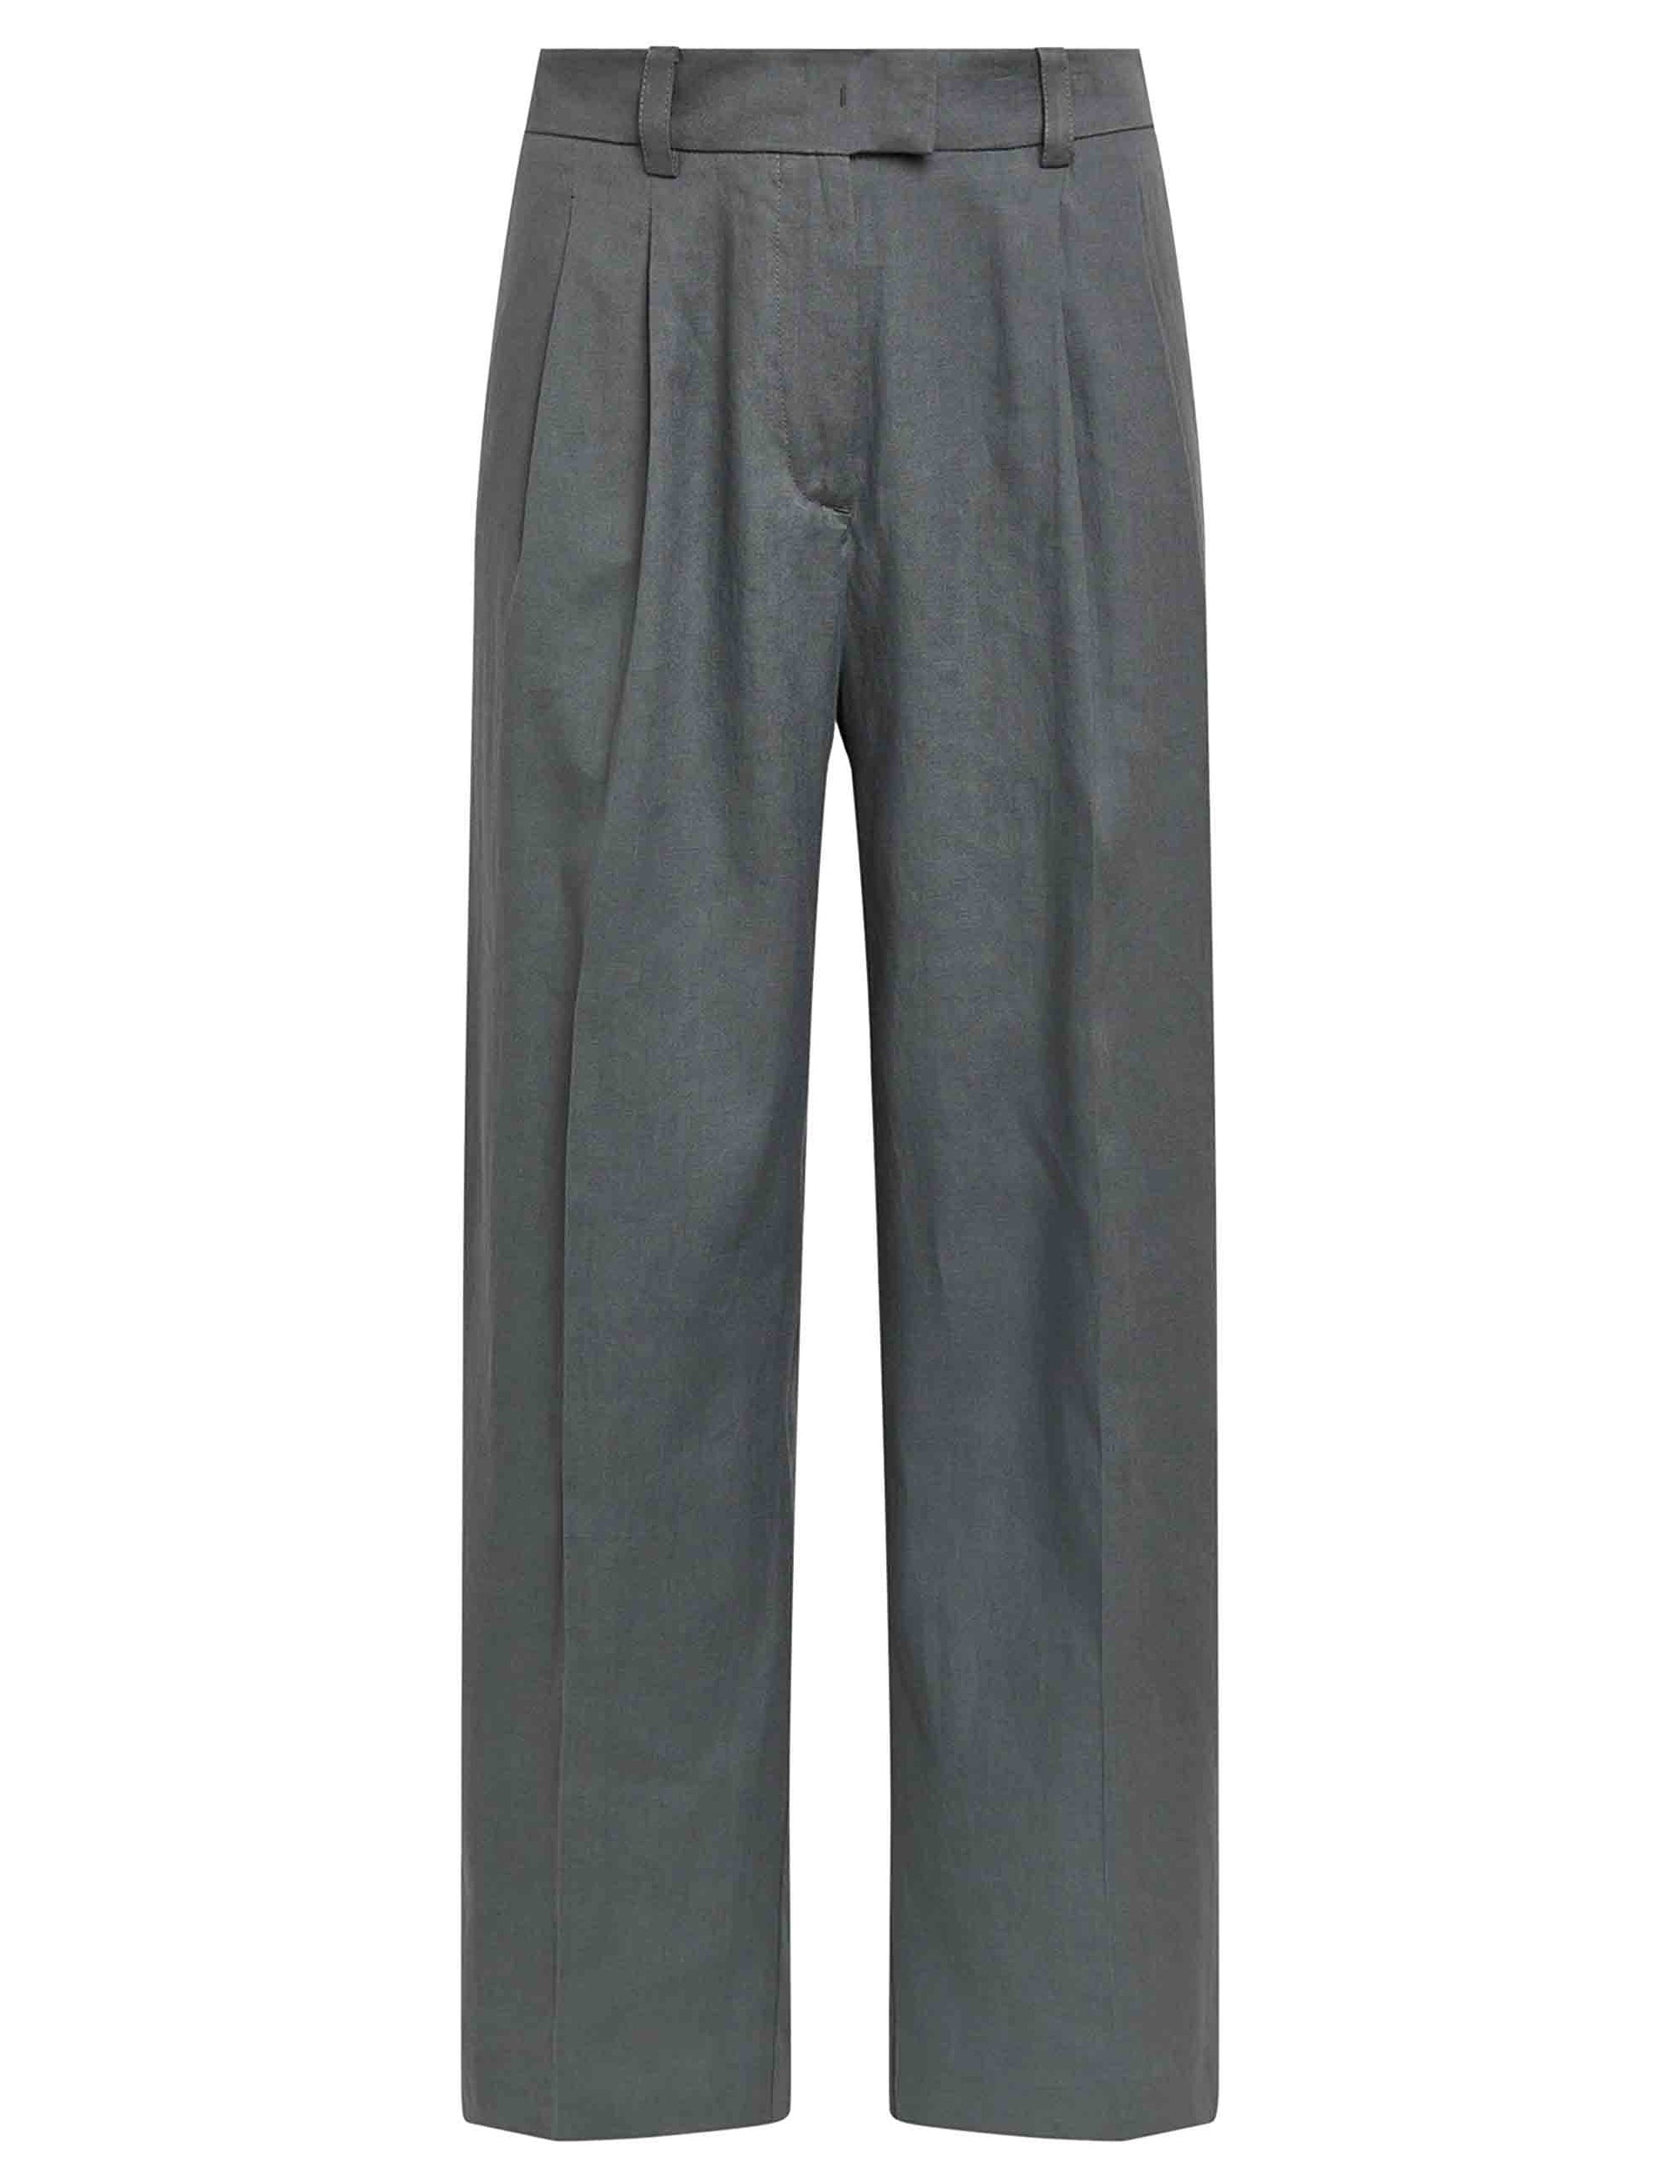 Linen women's trousers in gray linen and cotton blend